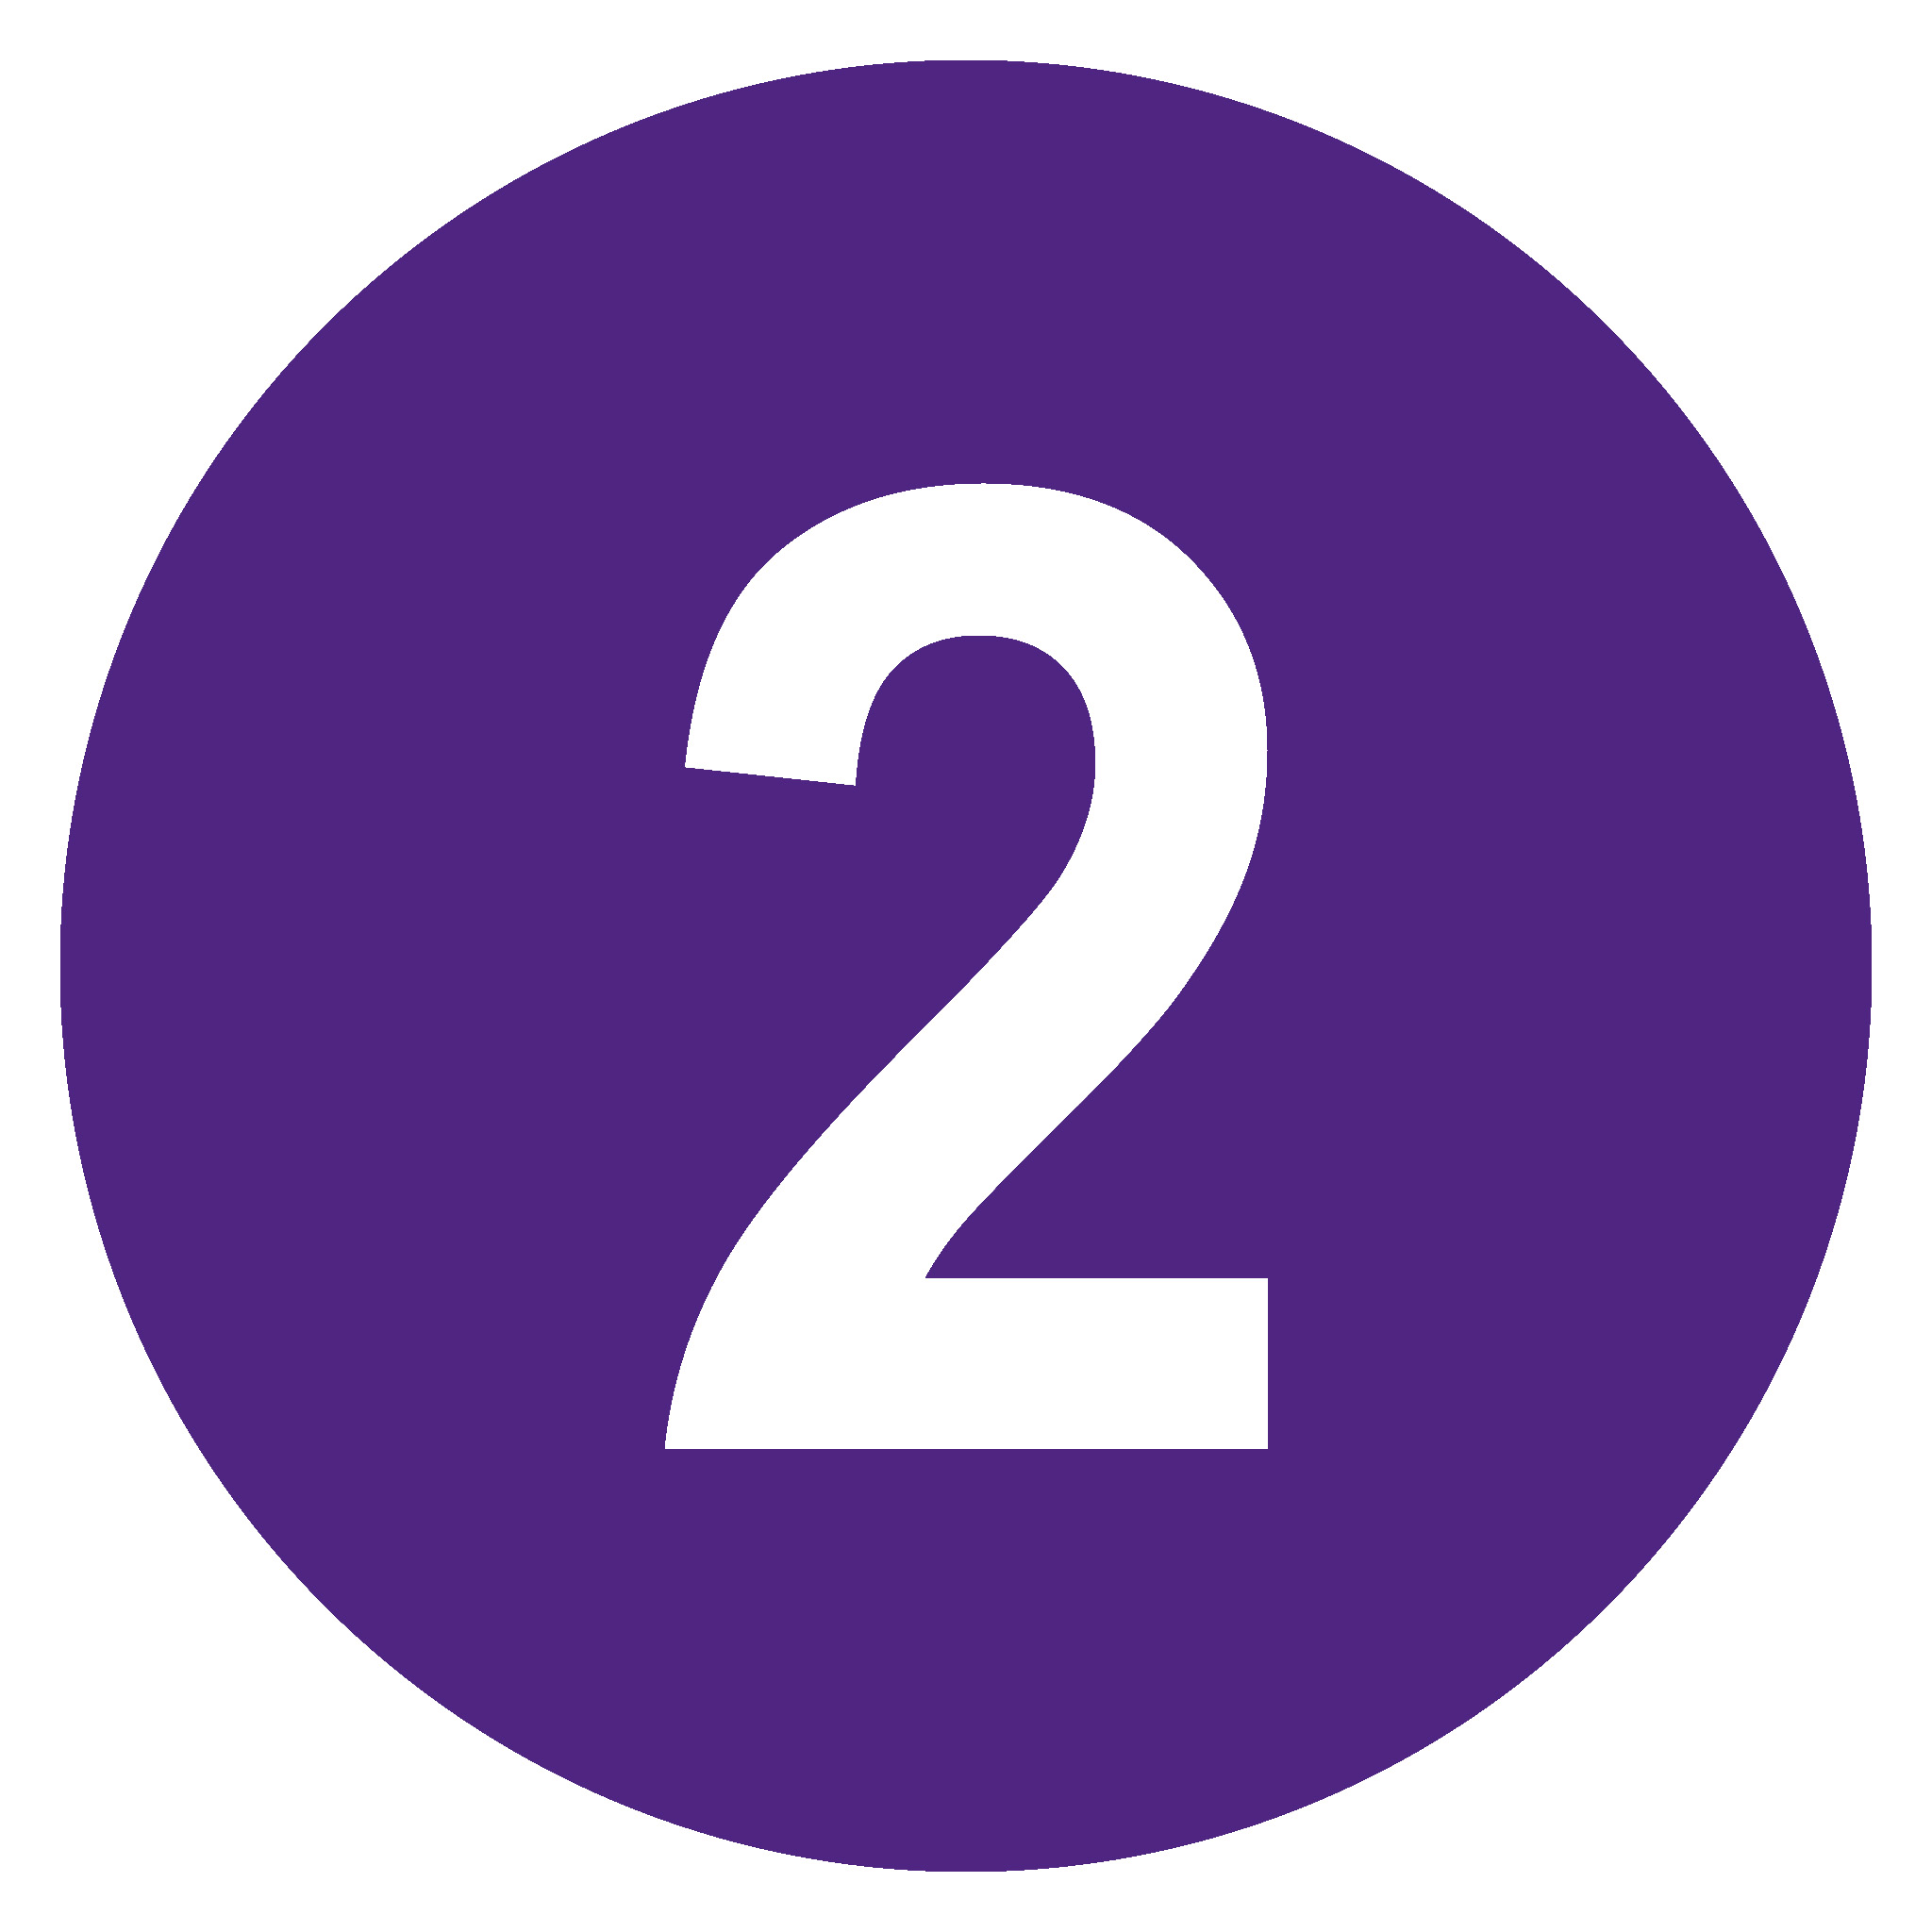 File:Eo circle purple number-2.svg - Wikimedia Commons